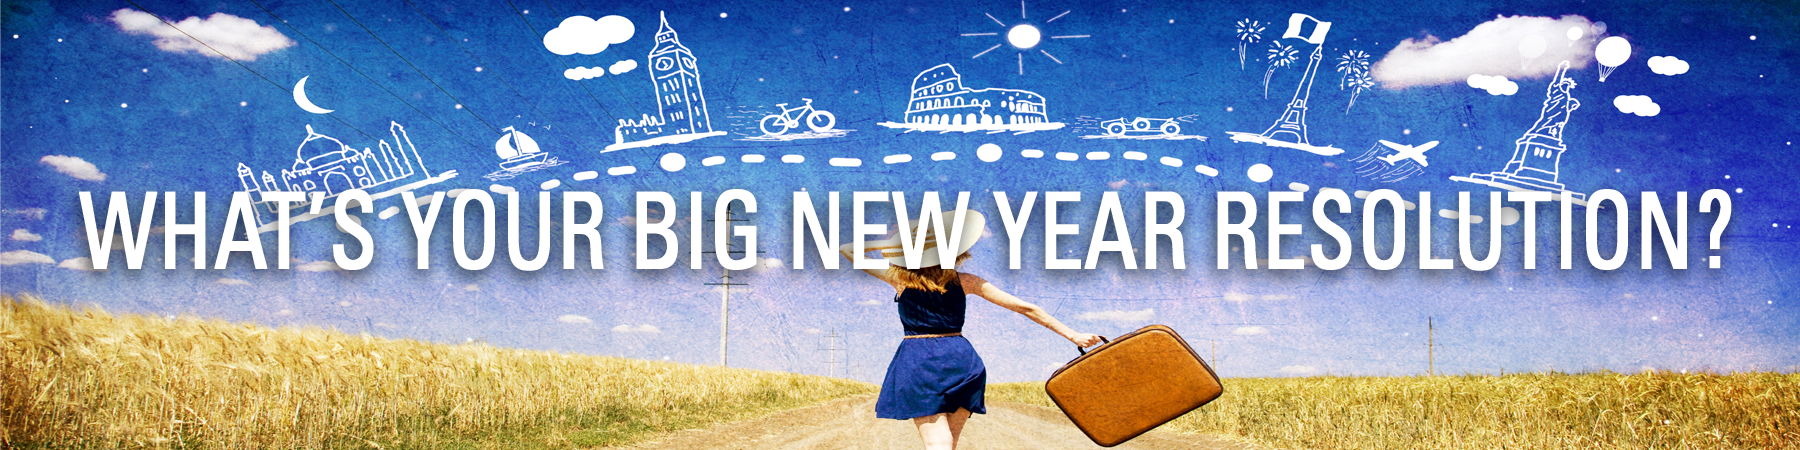 What’s Your Big New Year Resolution?